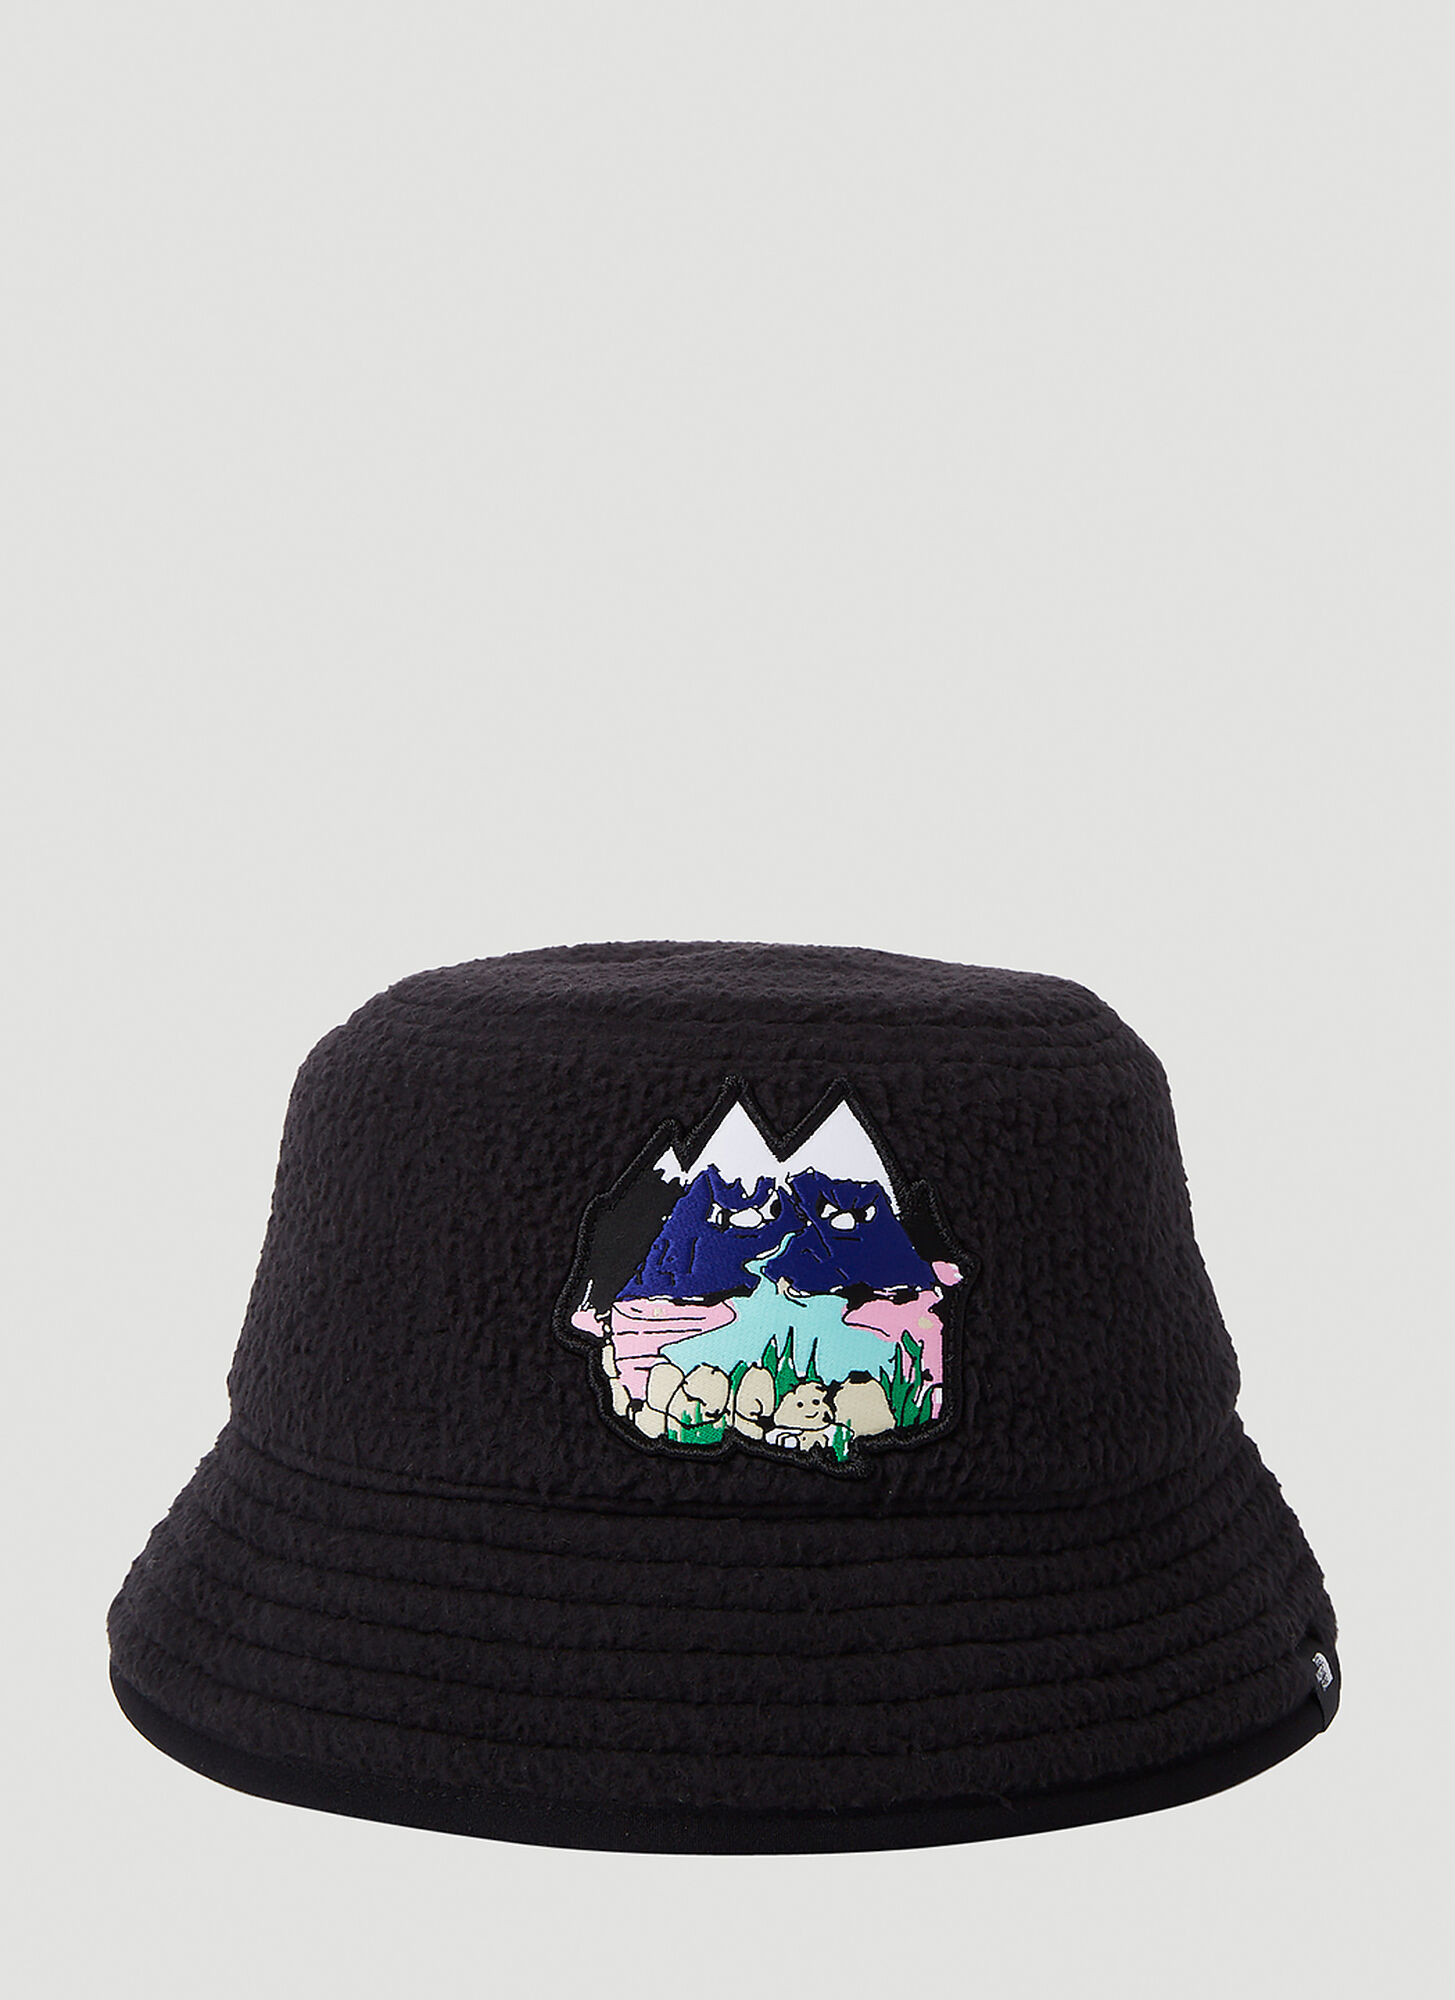 The North Face Black Box Graphic Patch Bucket Hat Female Black